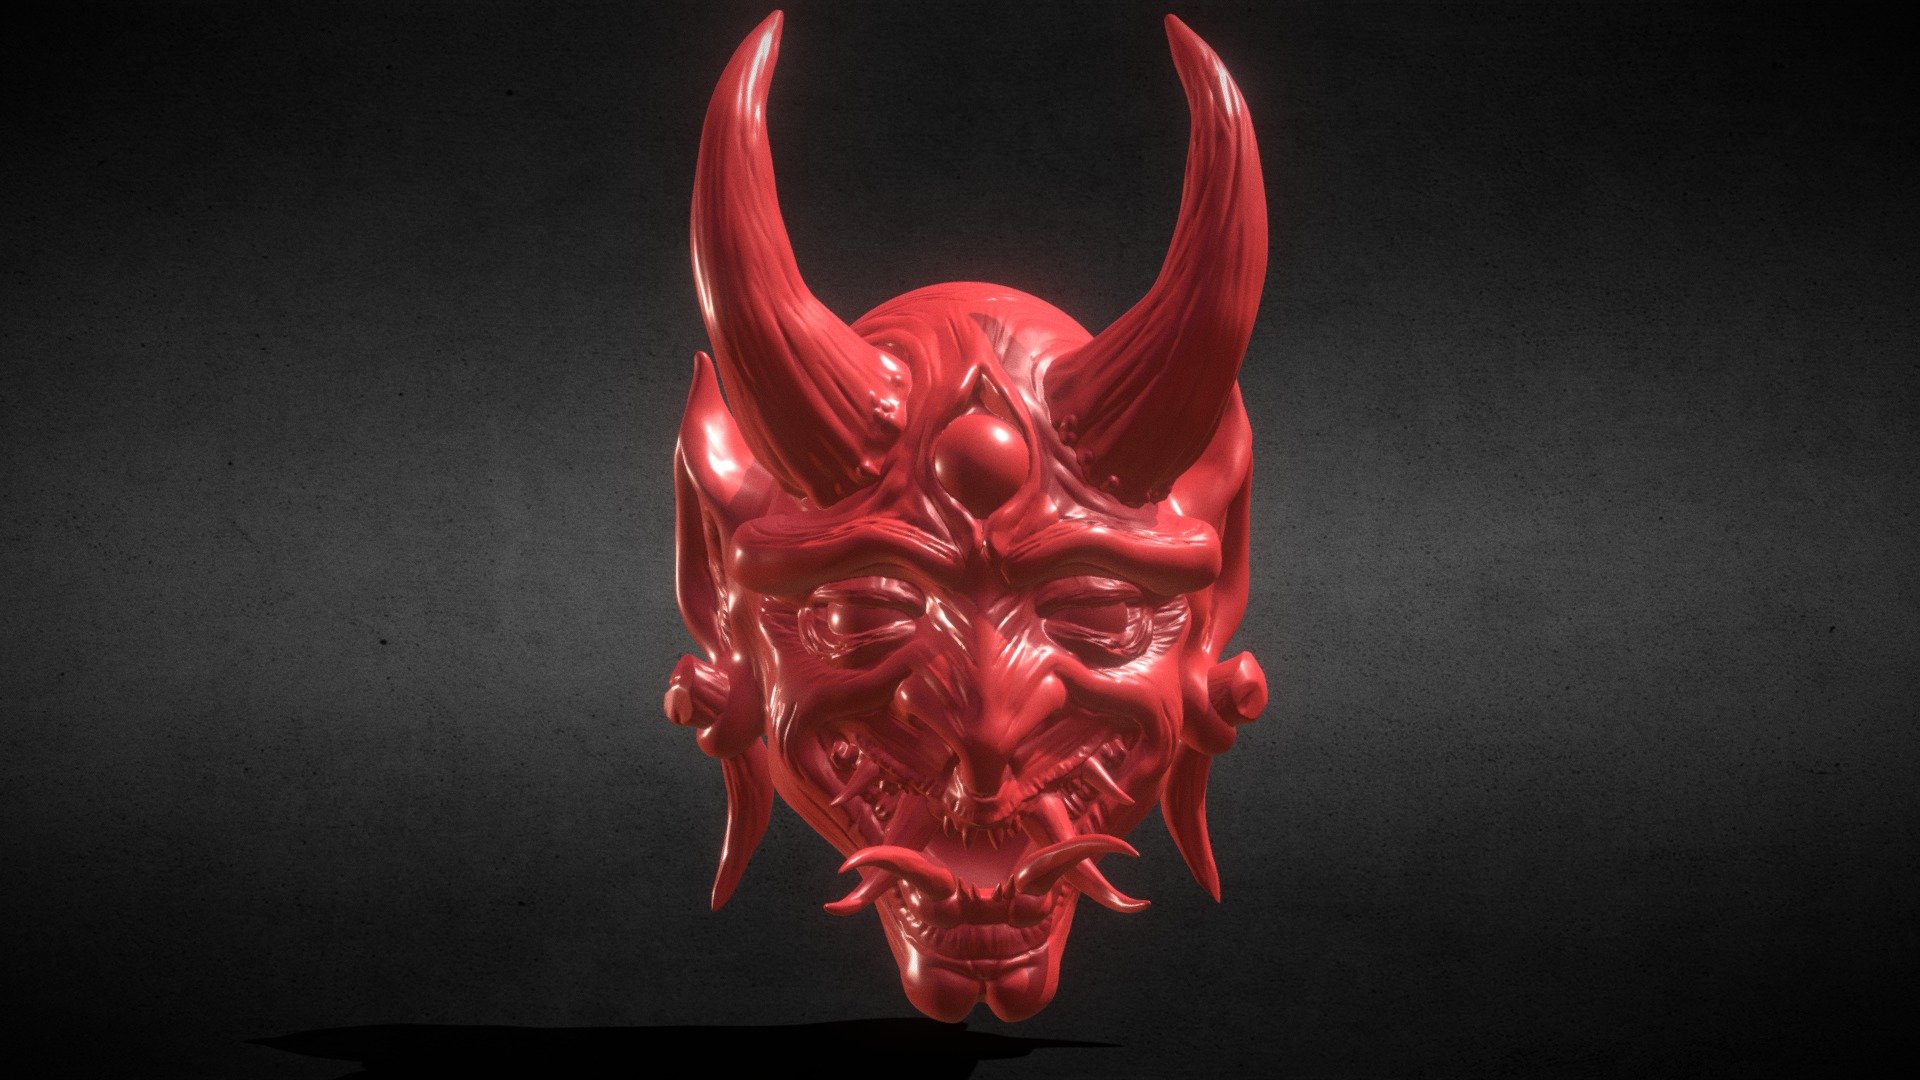 A Mask inspired by the legendary Oni a Japanese Troll or demon in this version I set up as mask for wearing or decorating the size is 12 cm and I include the OBJ, STL and ZBrush files If you need 3D Game Assets or STL files I can do commission works 3d model